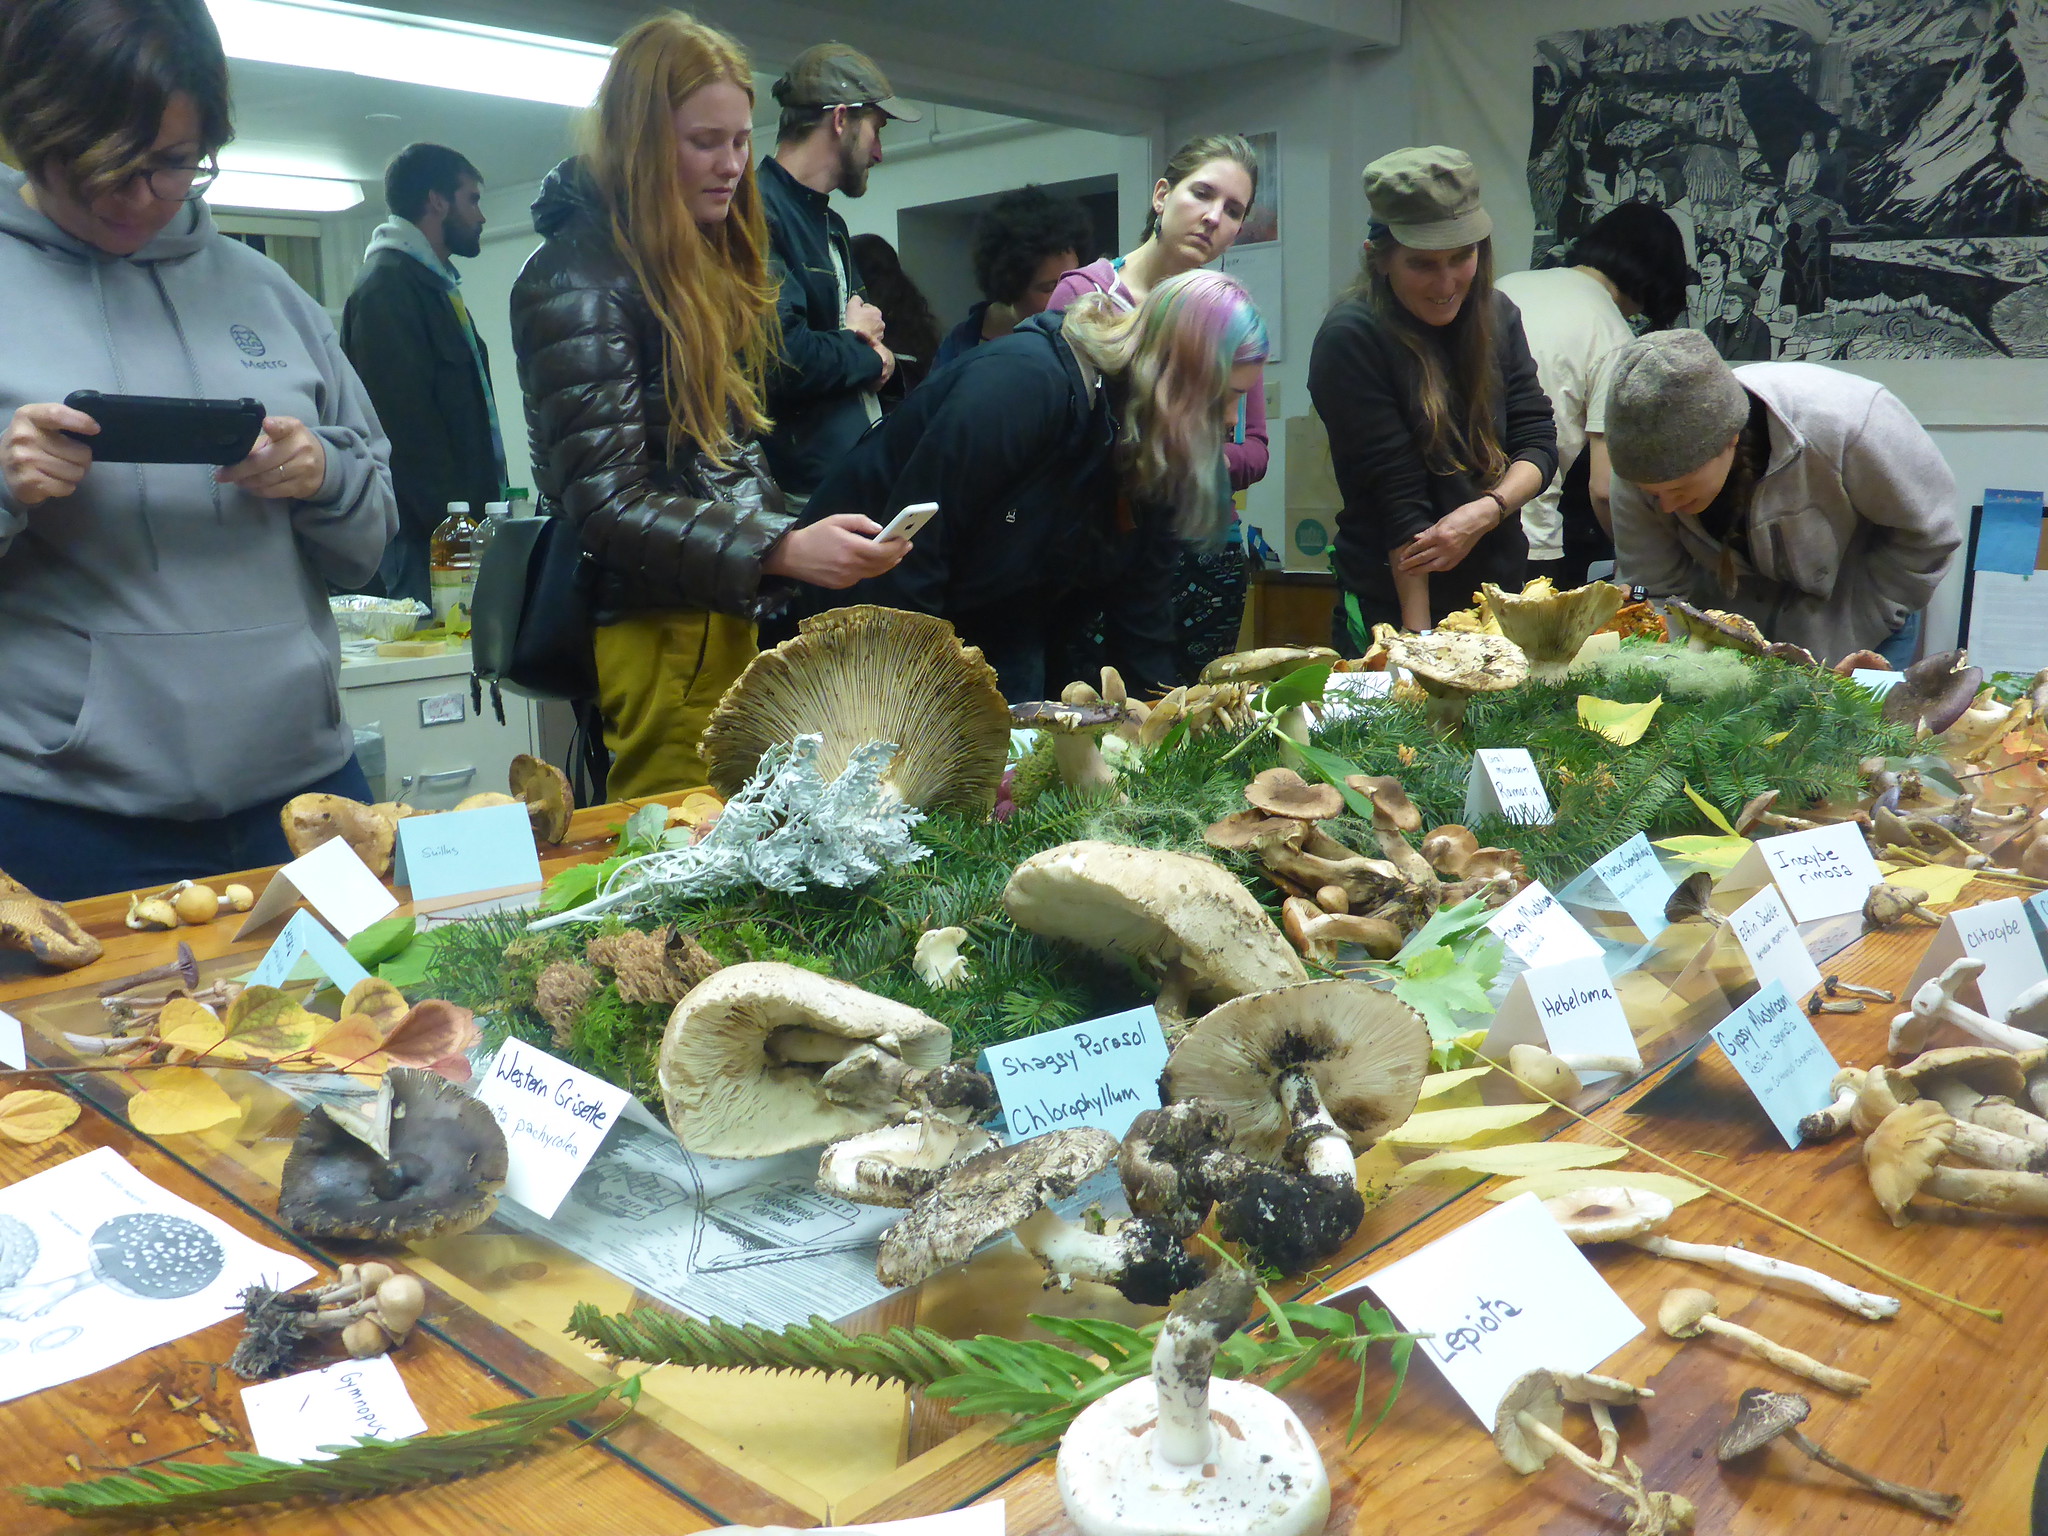 This image shows a photo from a Bark Ecology club: Mushroom! It shows a table covered in moss and various mushrooms with a group of volunteers and staff gathered around and examining the specimens.